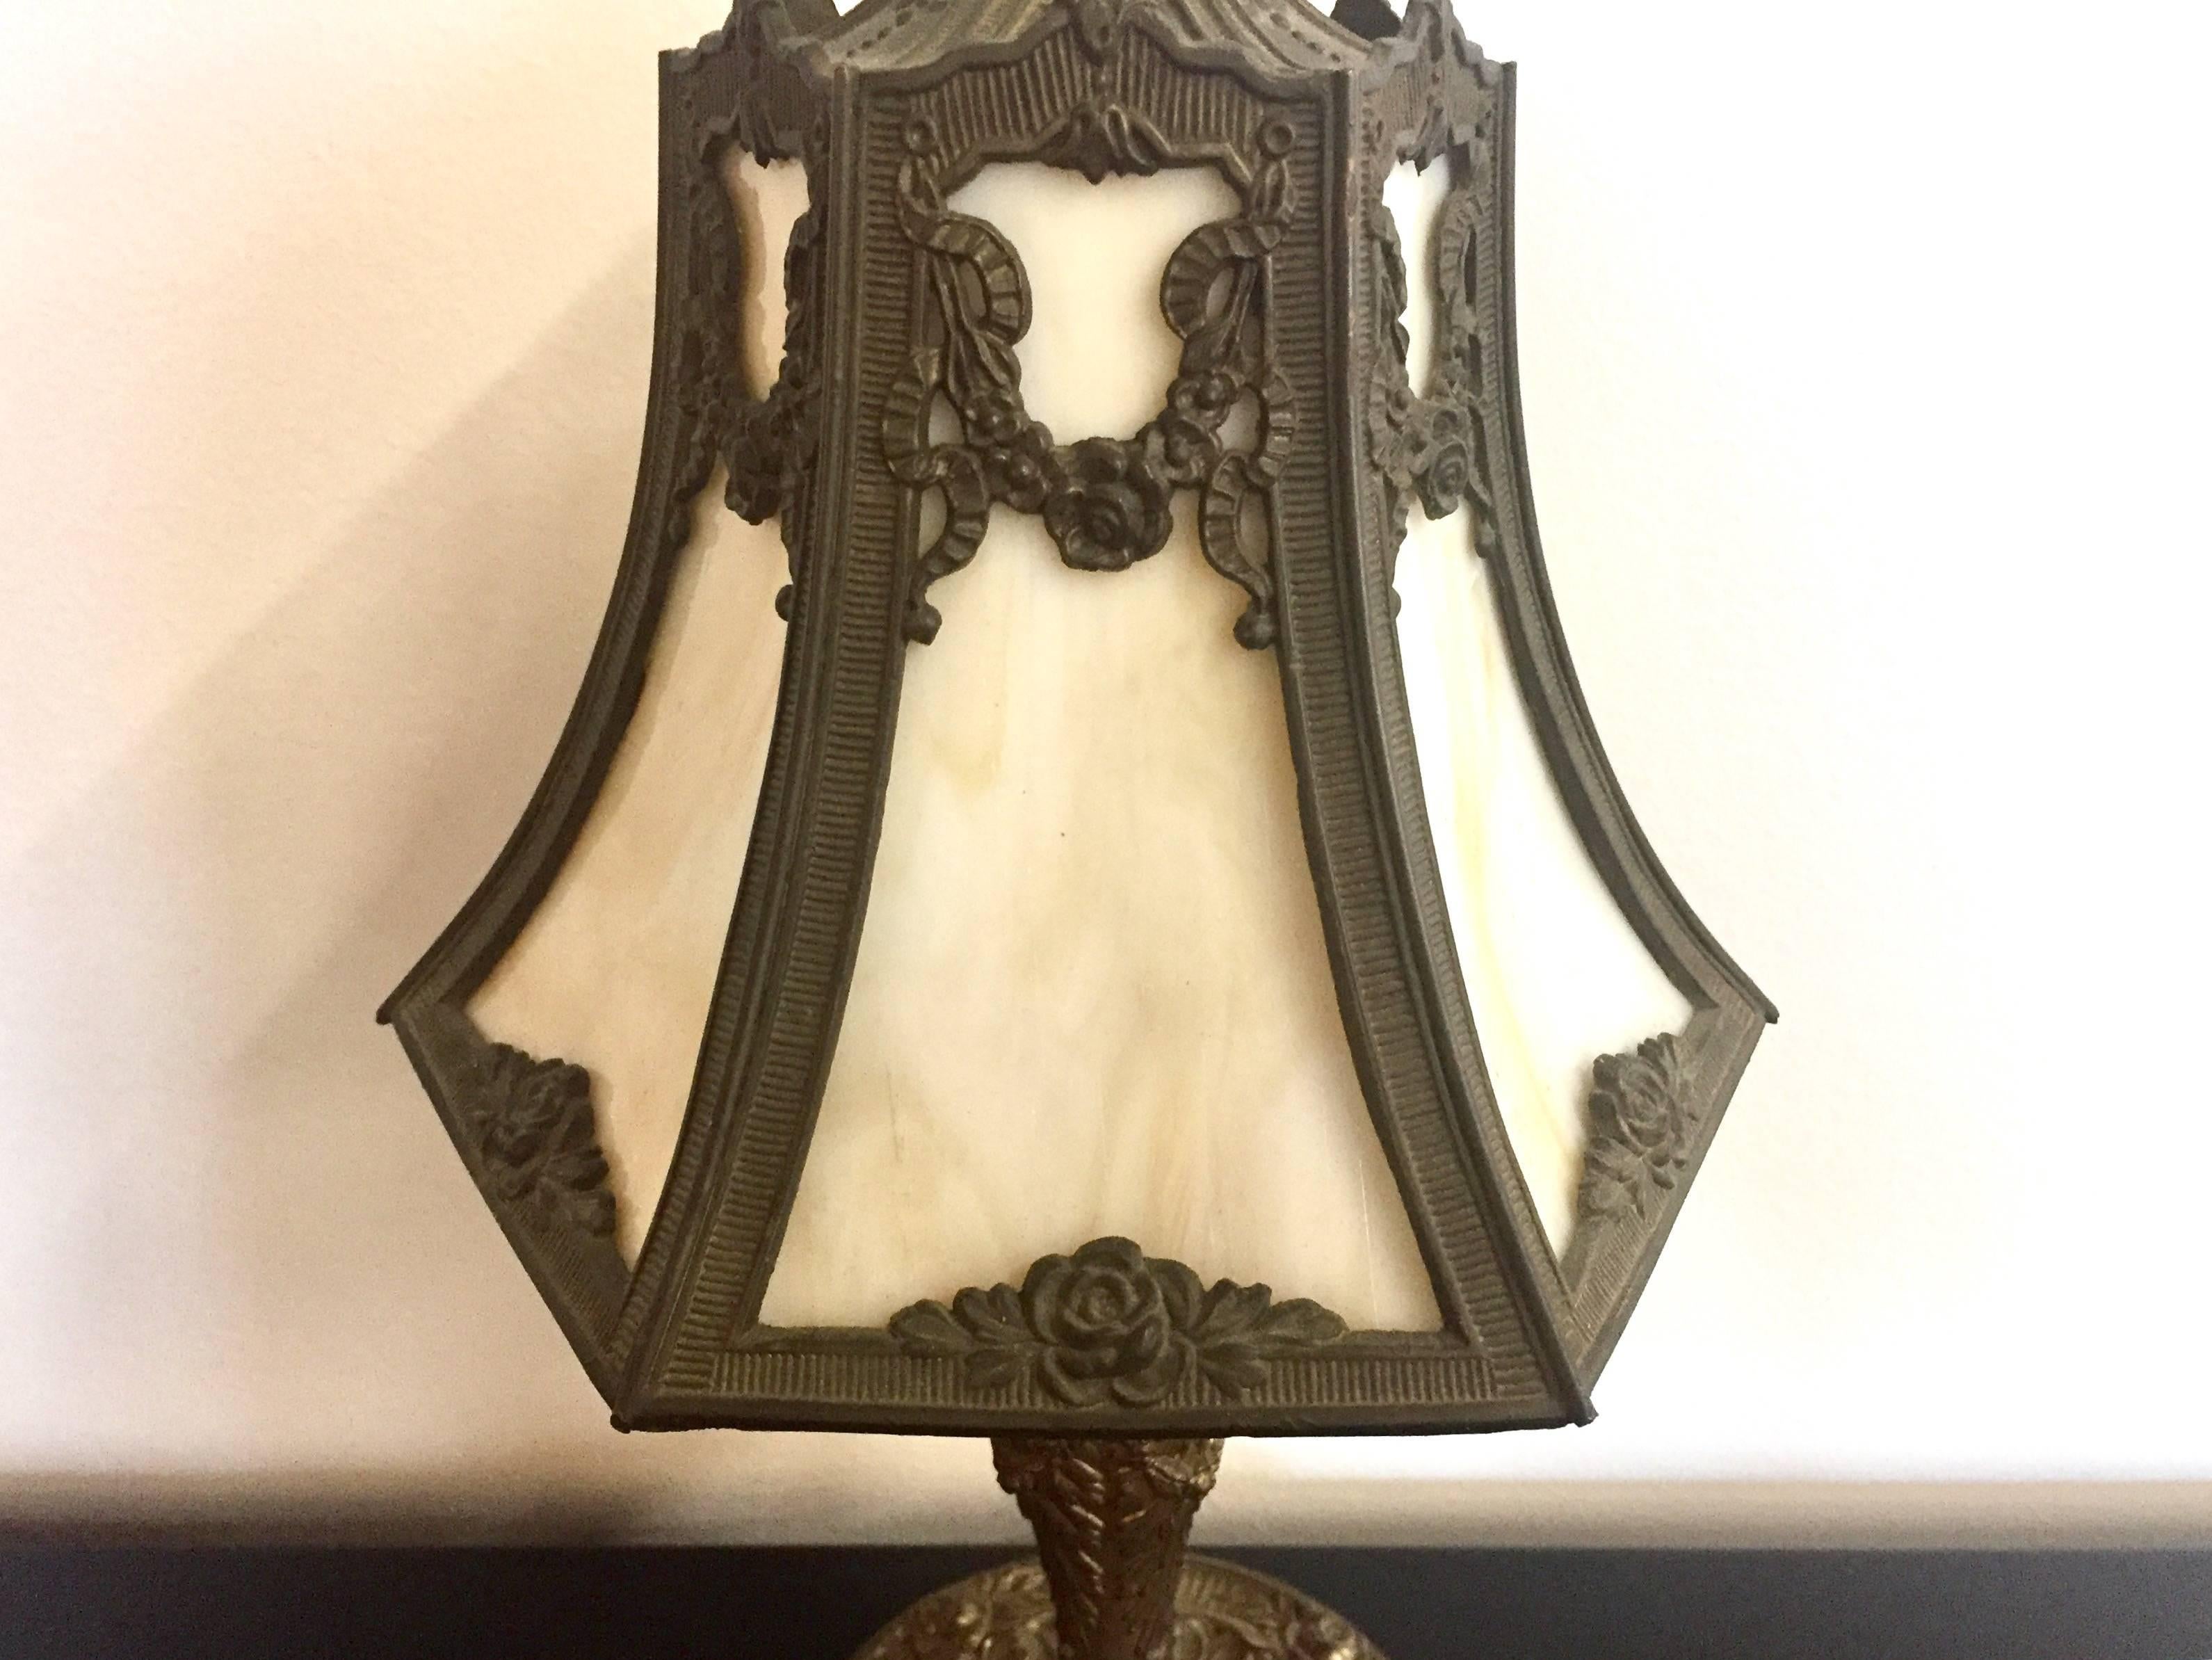 Vintage 1920s Boudoir lamp with slag glass shade and ornate rose garden design. Perfect for dressing table or bedside table. Has been rewired to UL standards. Measures 8 inches wide and 14.5 inches high.